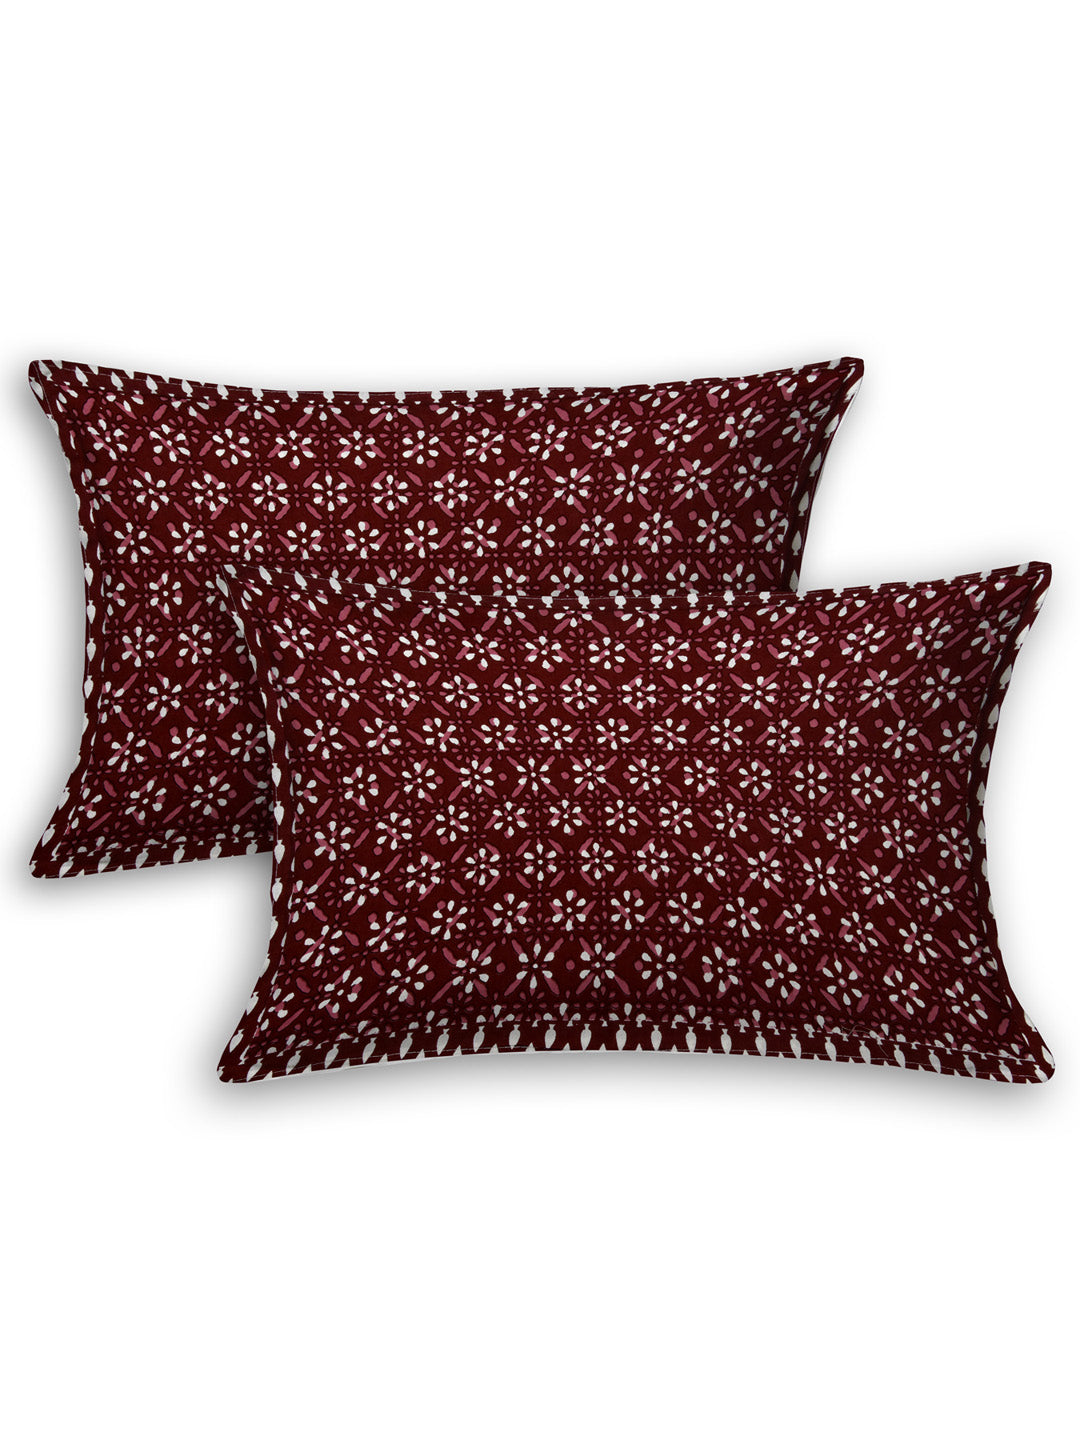 LIVING ROOTS Double Bedsheet King Size Maroon Colour Pure Cotton - 1 Bedsheet with 2 Pillow Covers (31-037-A)